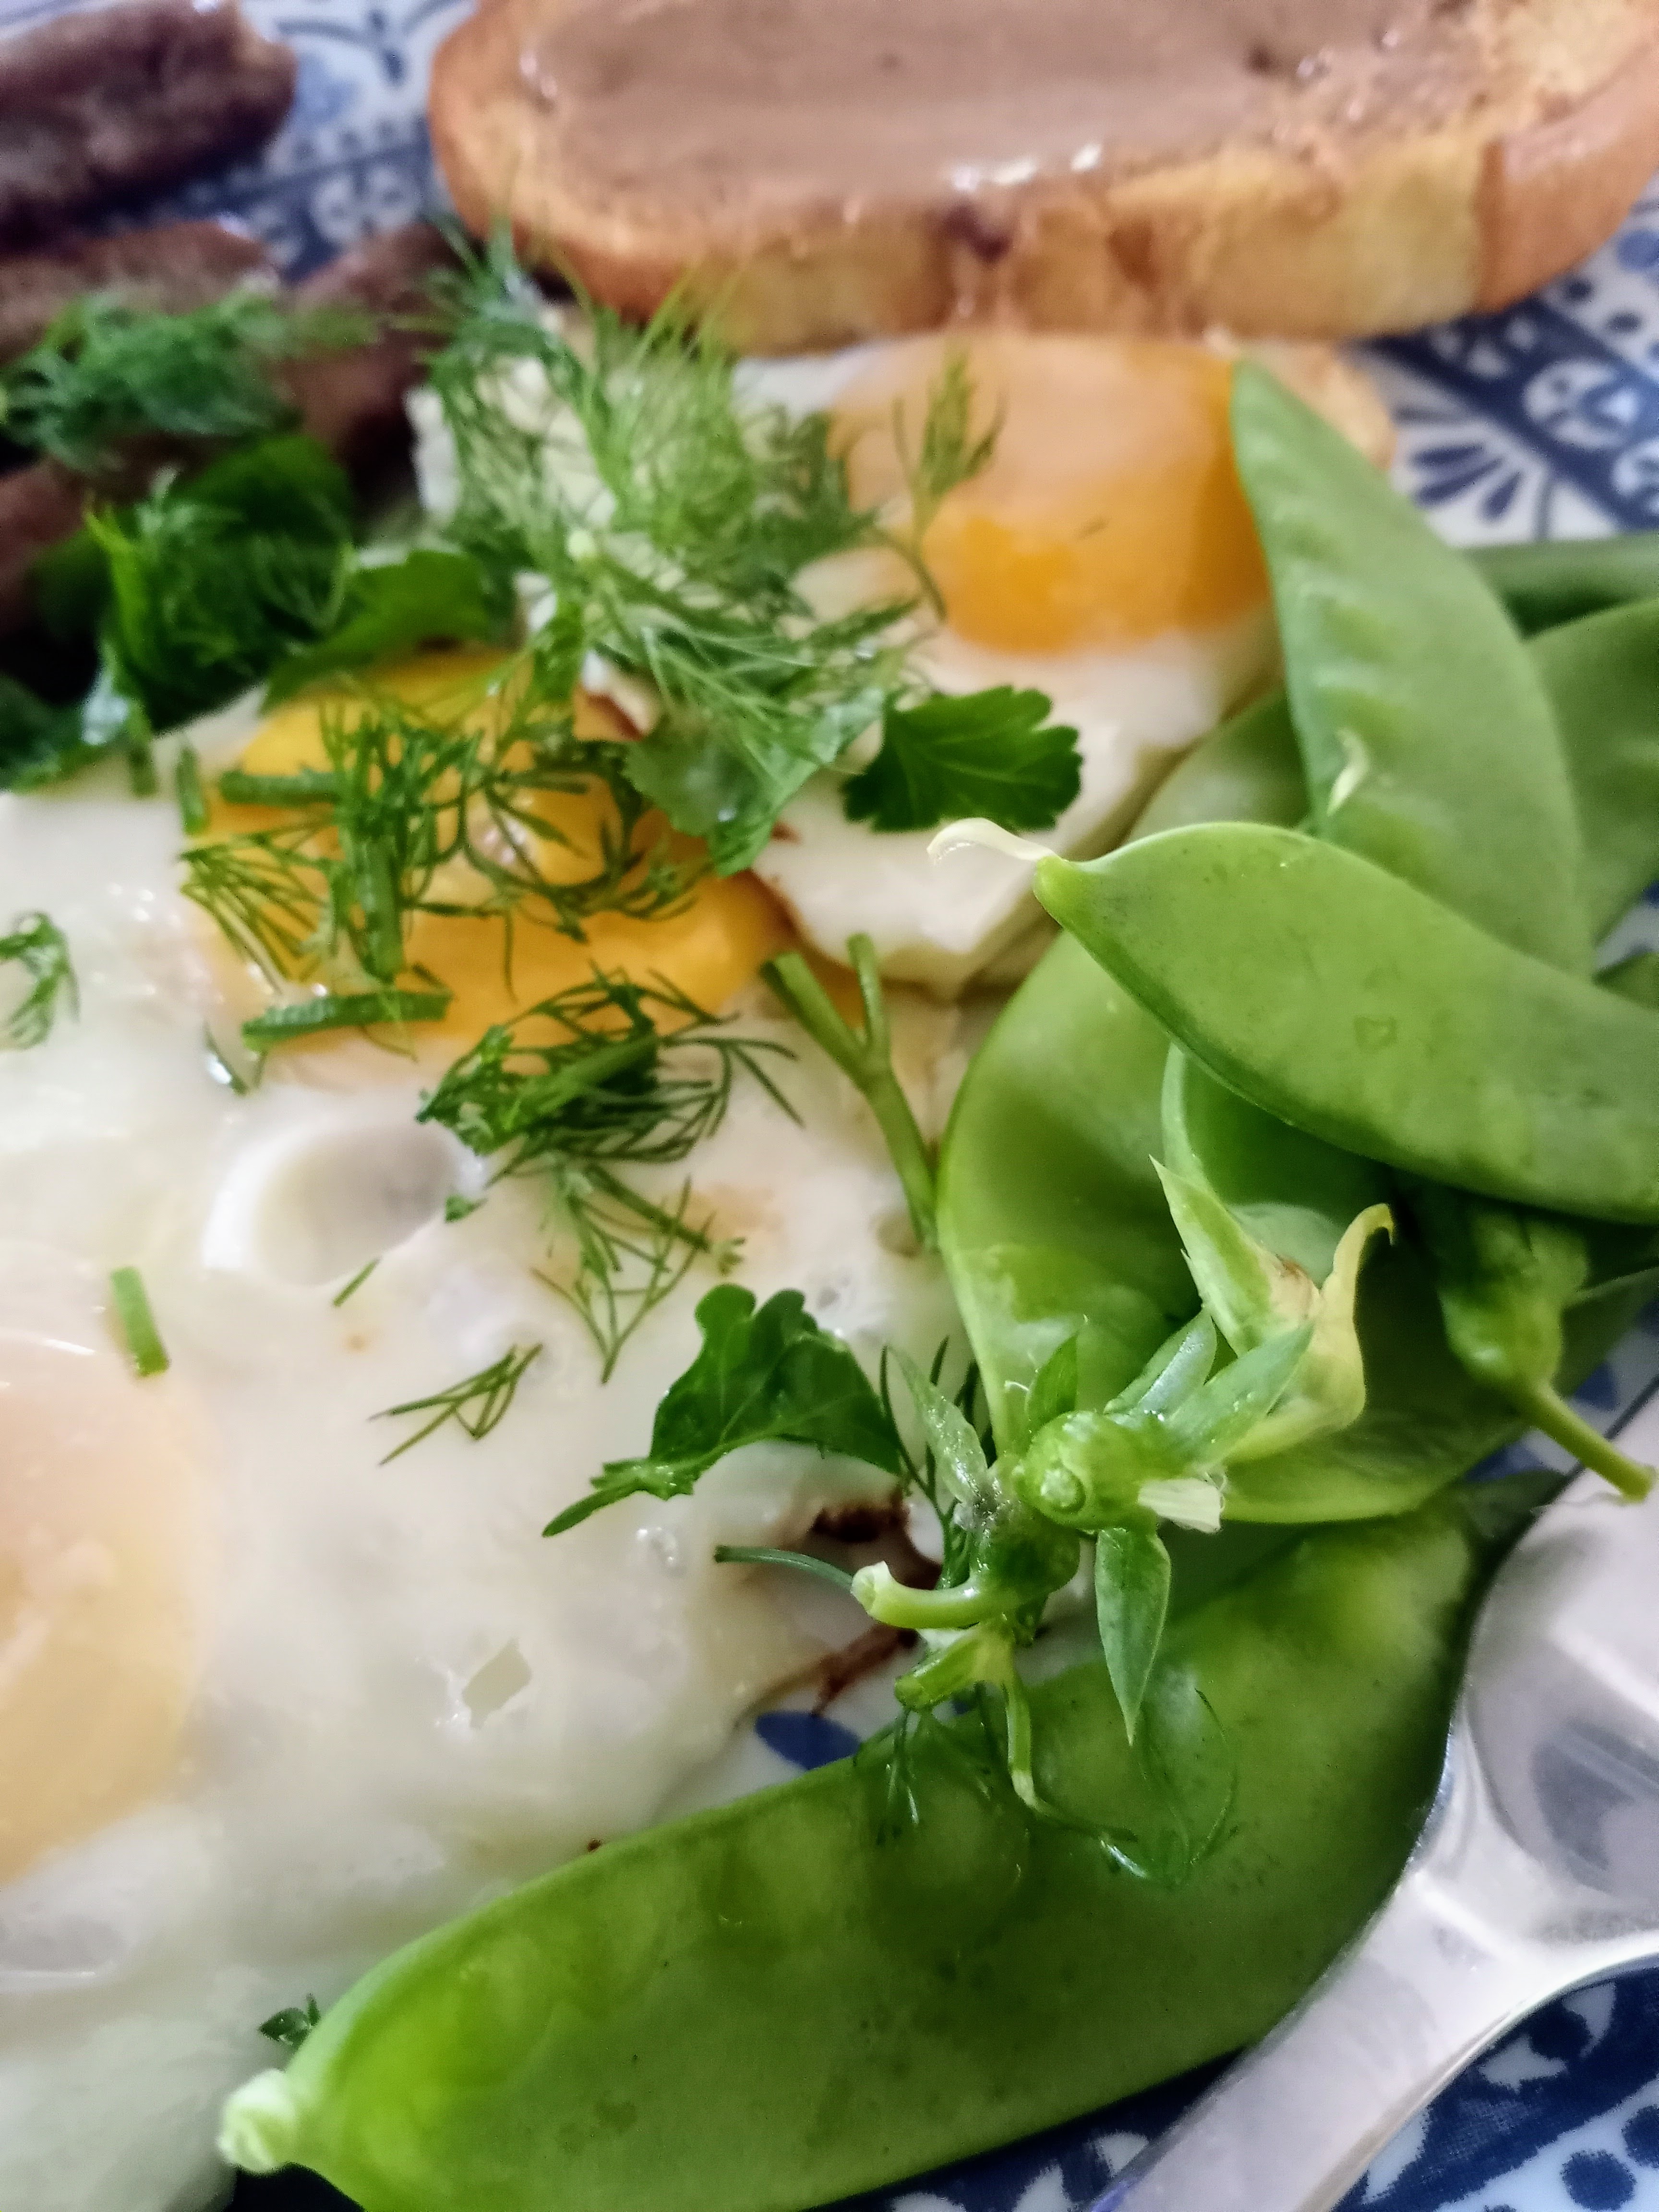 Peas with eggs